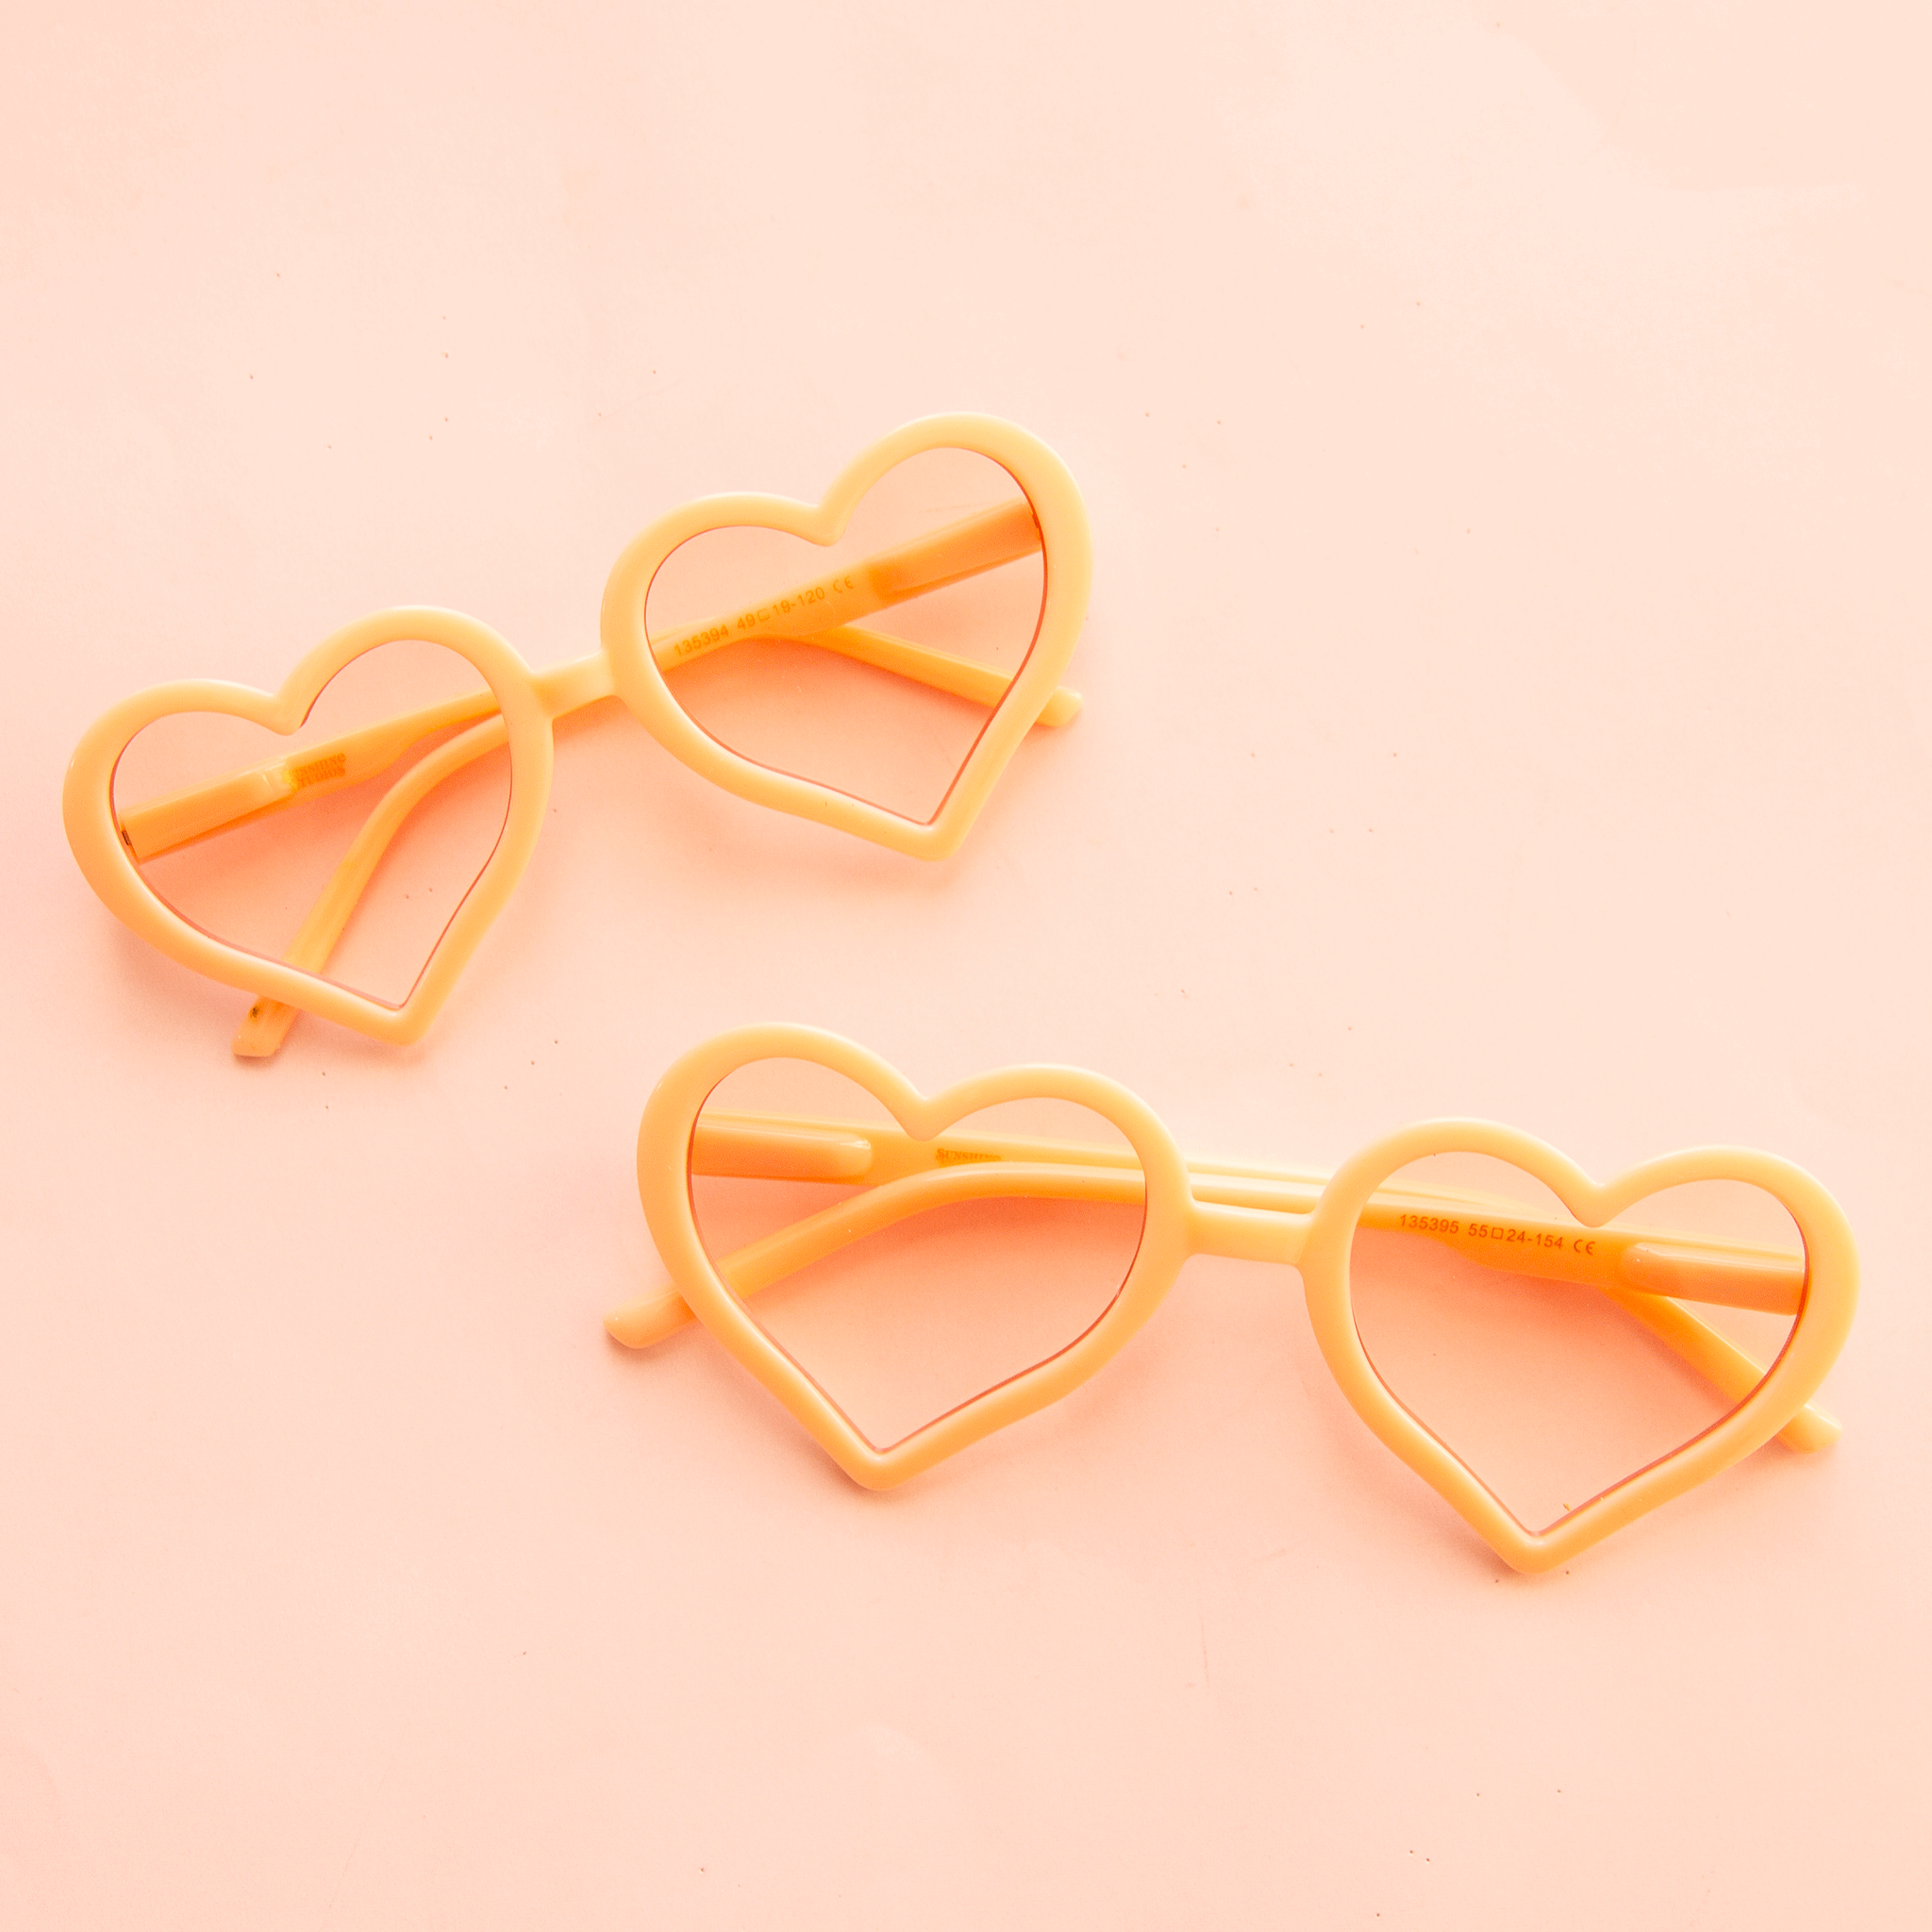 How About Orange: Heart-shaped paper clips